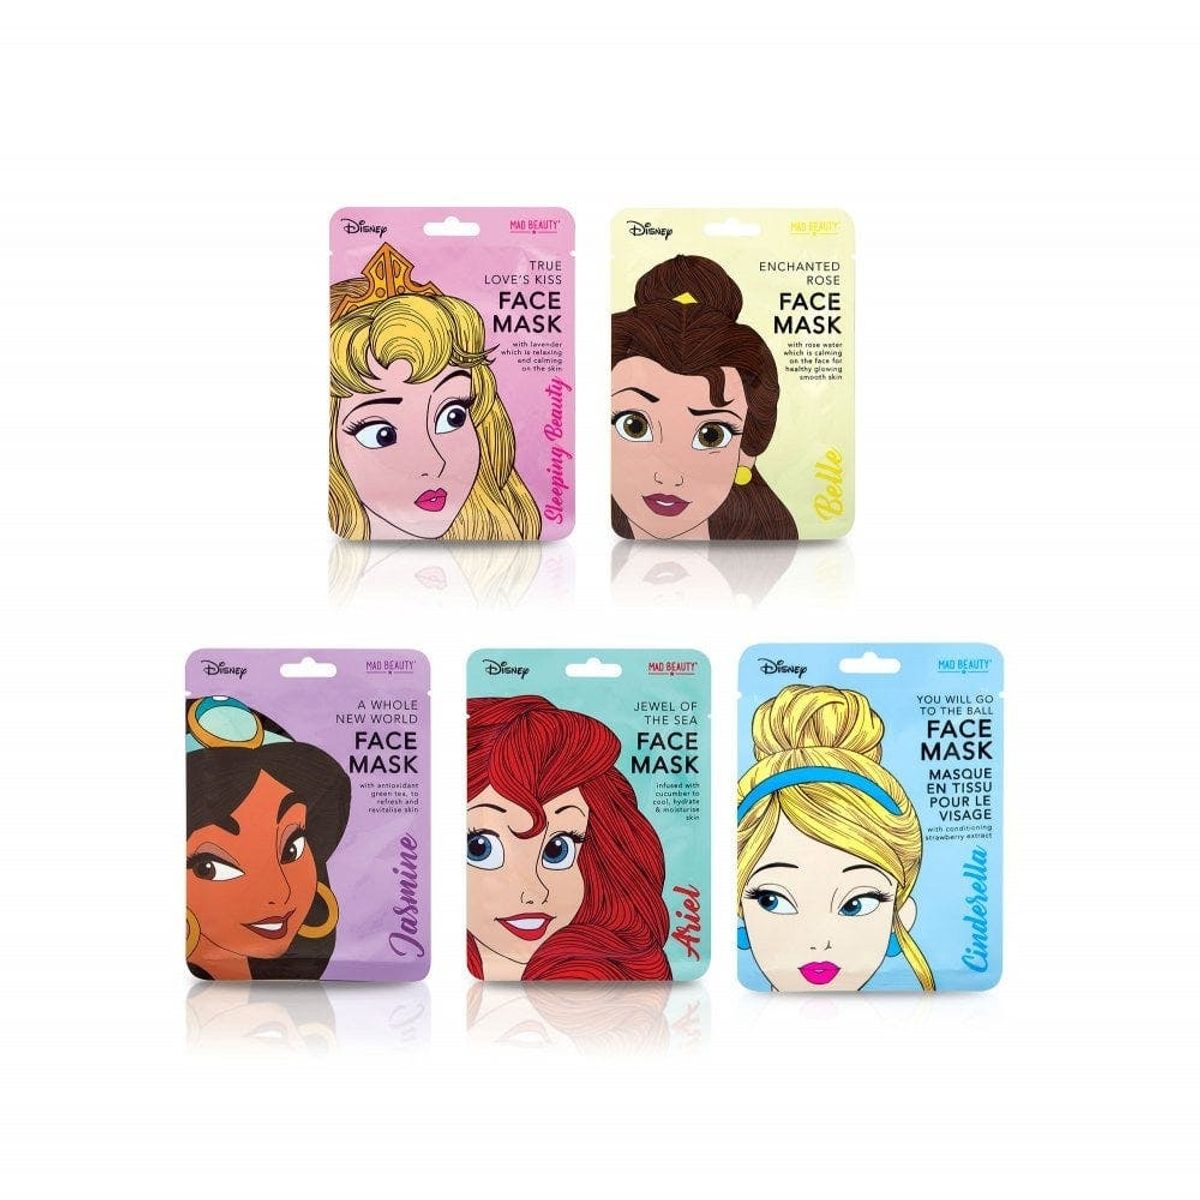 9 Disney-Themed Beauty Products That Bring the Magic to Your Vanity